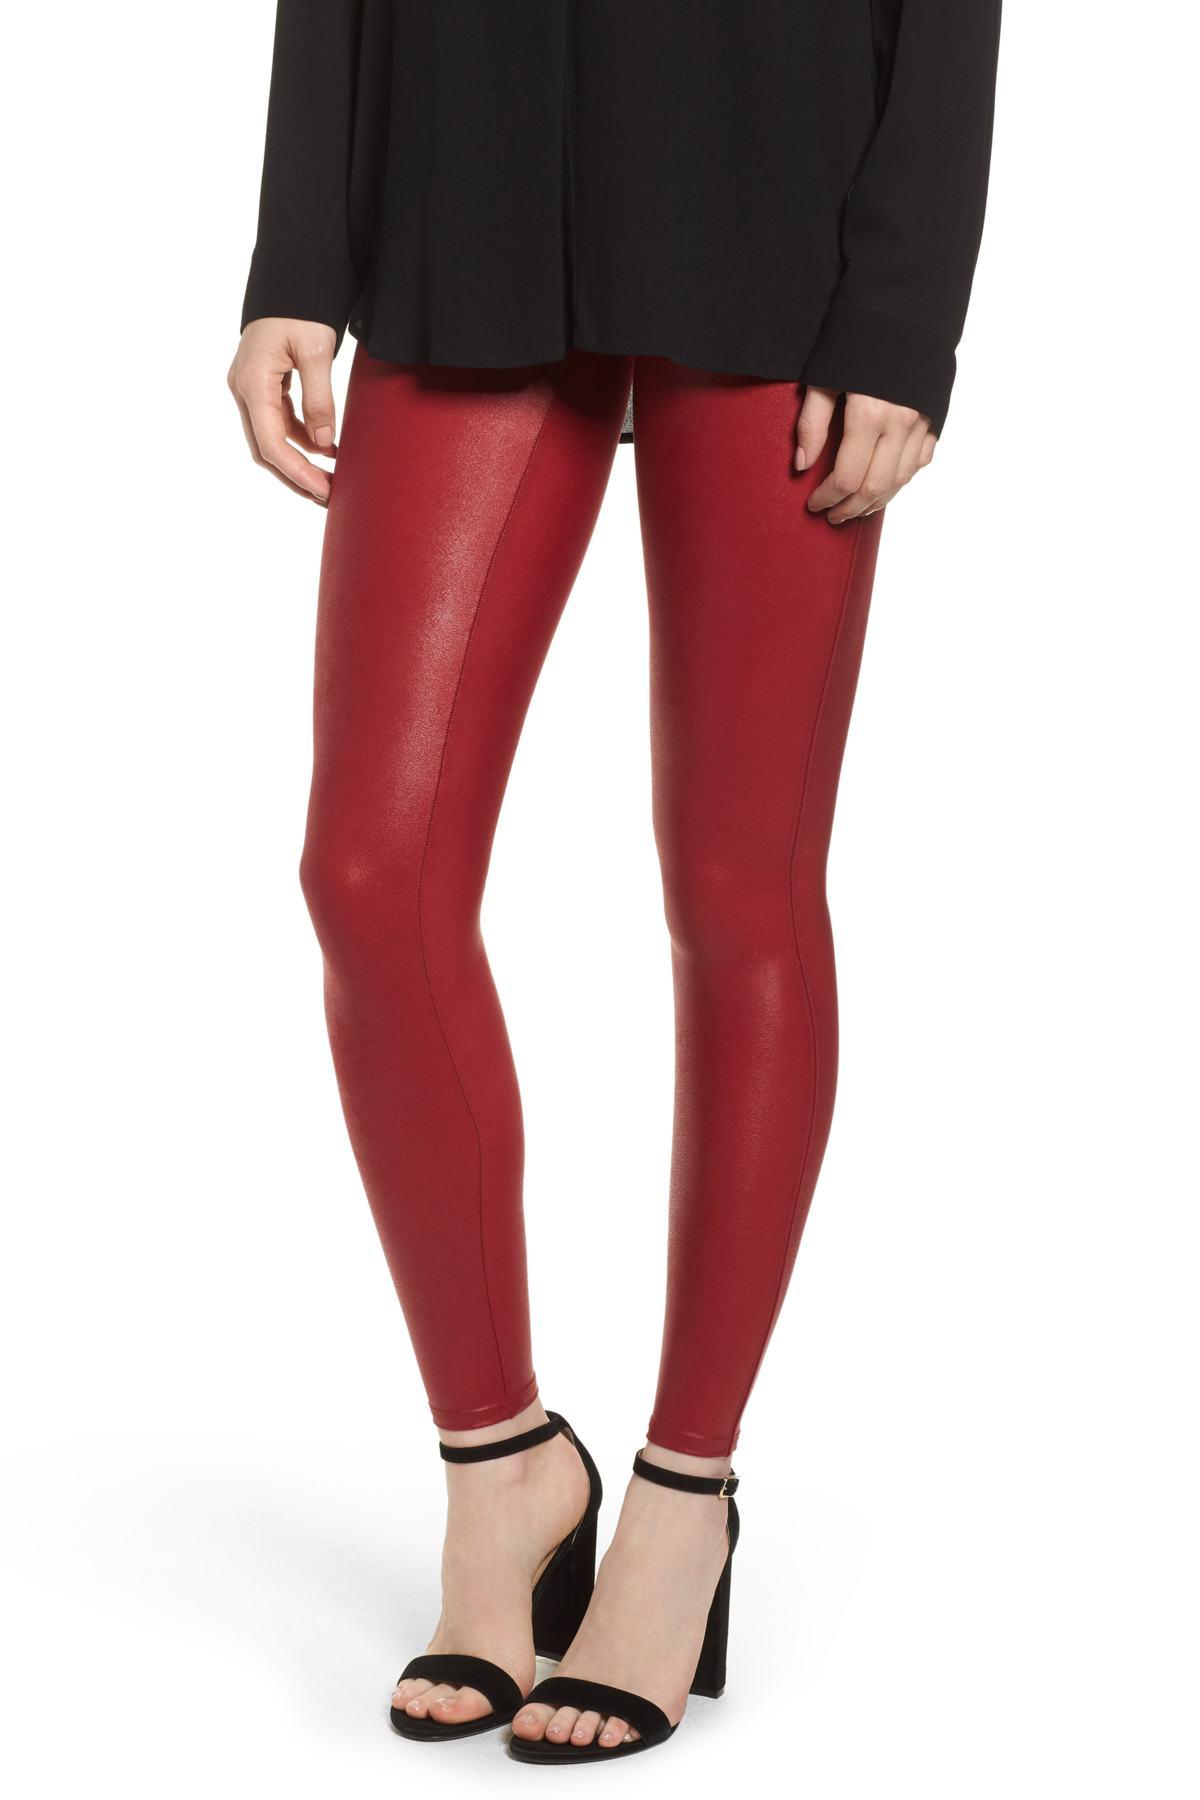 Spanx (r) Faux Leather Leggings in Crimson (Red) - Lyst